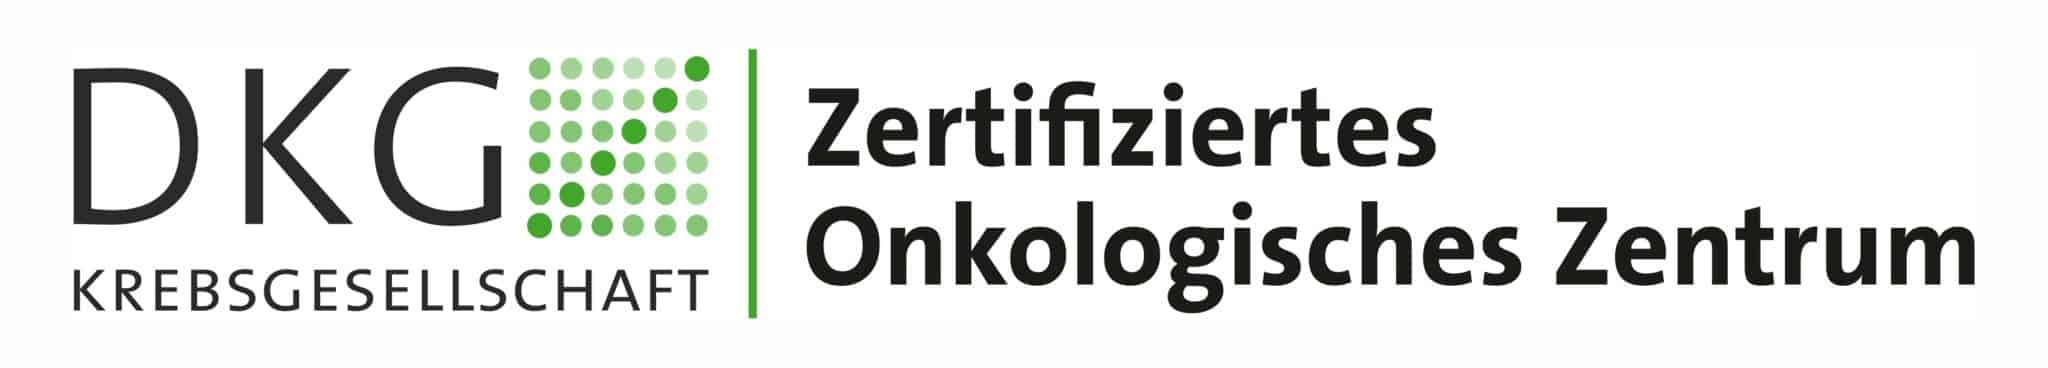 Anästhesiologie 2 Behand­lung & Therapie